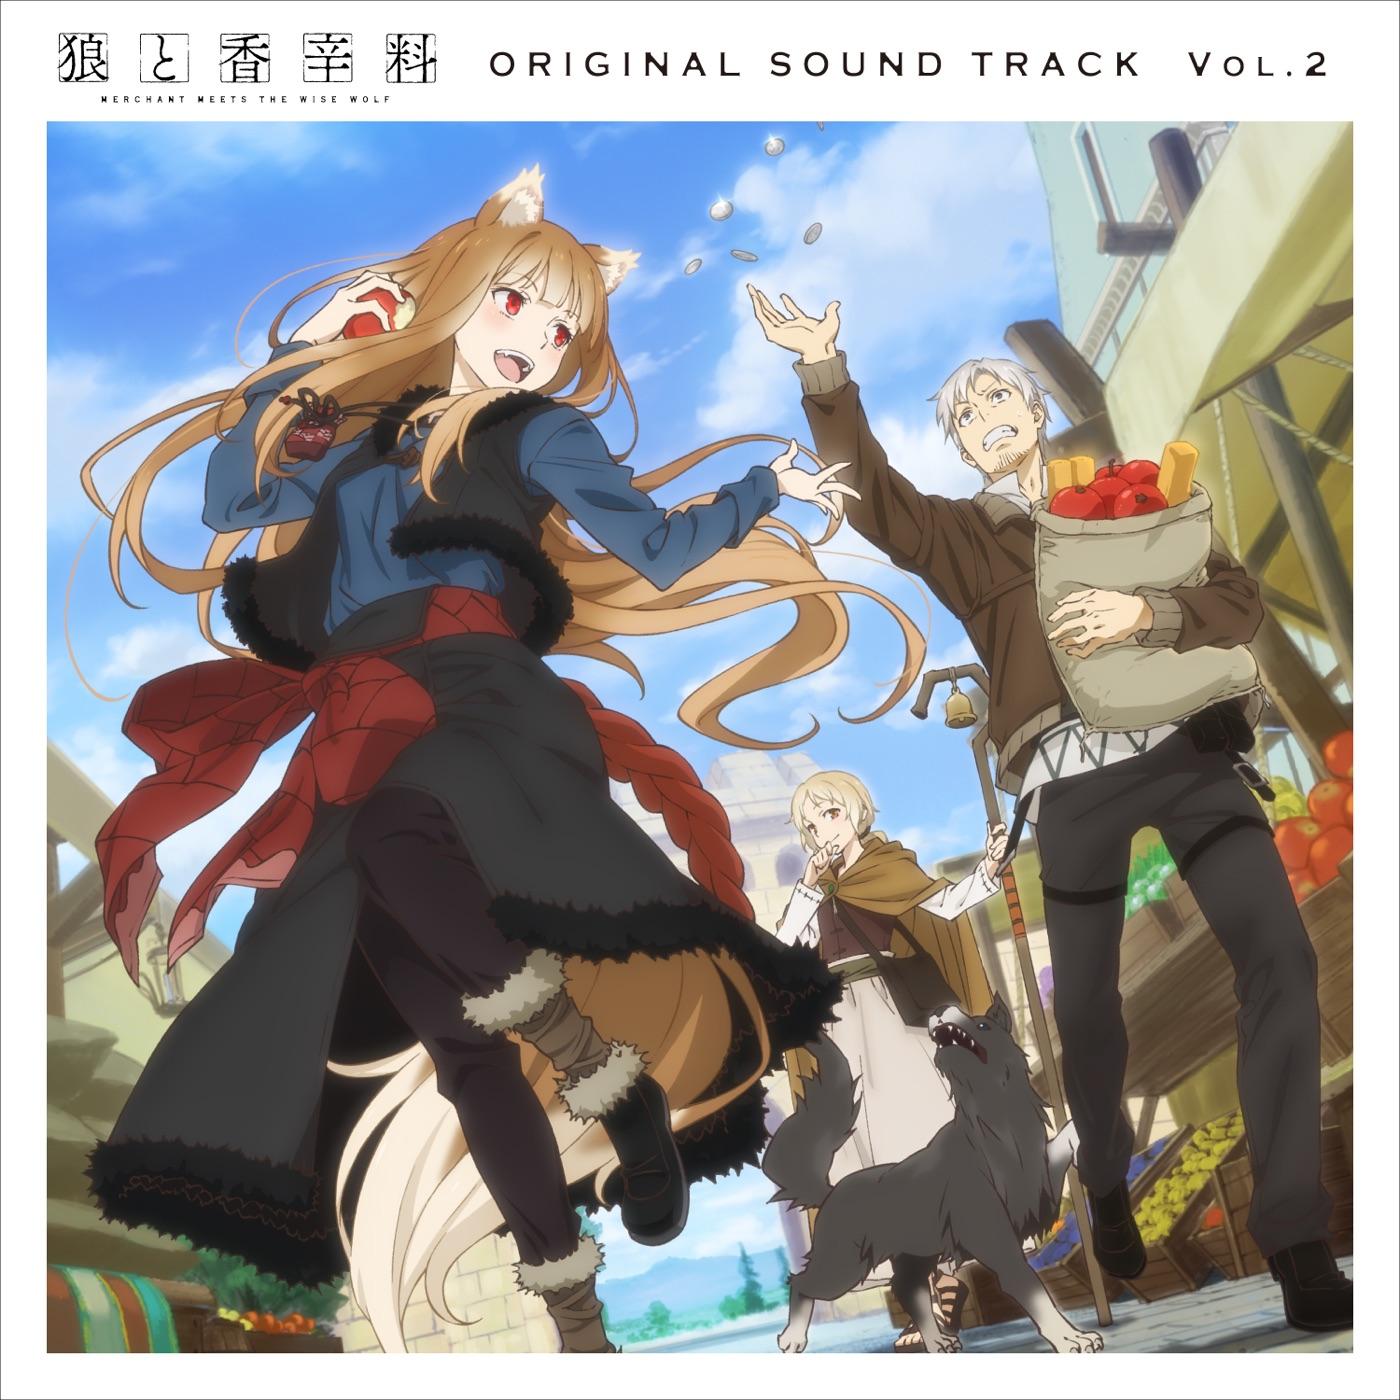 Spice and Wolf: Merchant Meets the Wise Wolf (Original Soundtrack Vol.2)